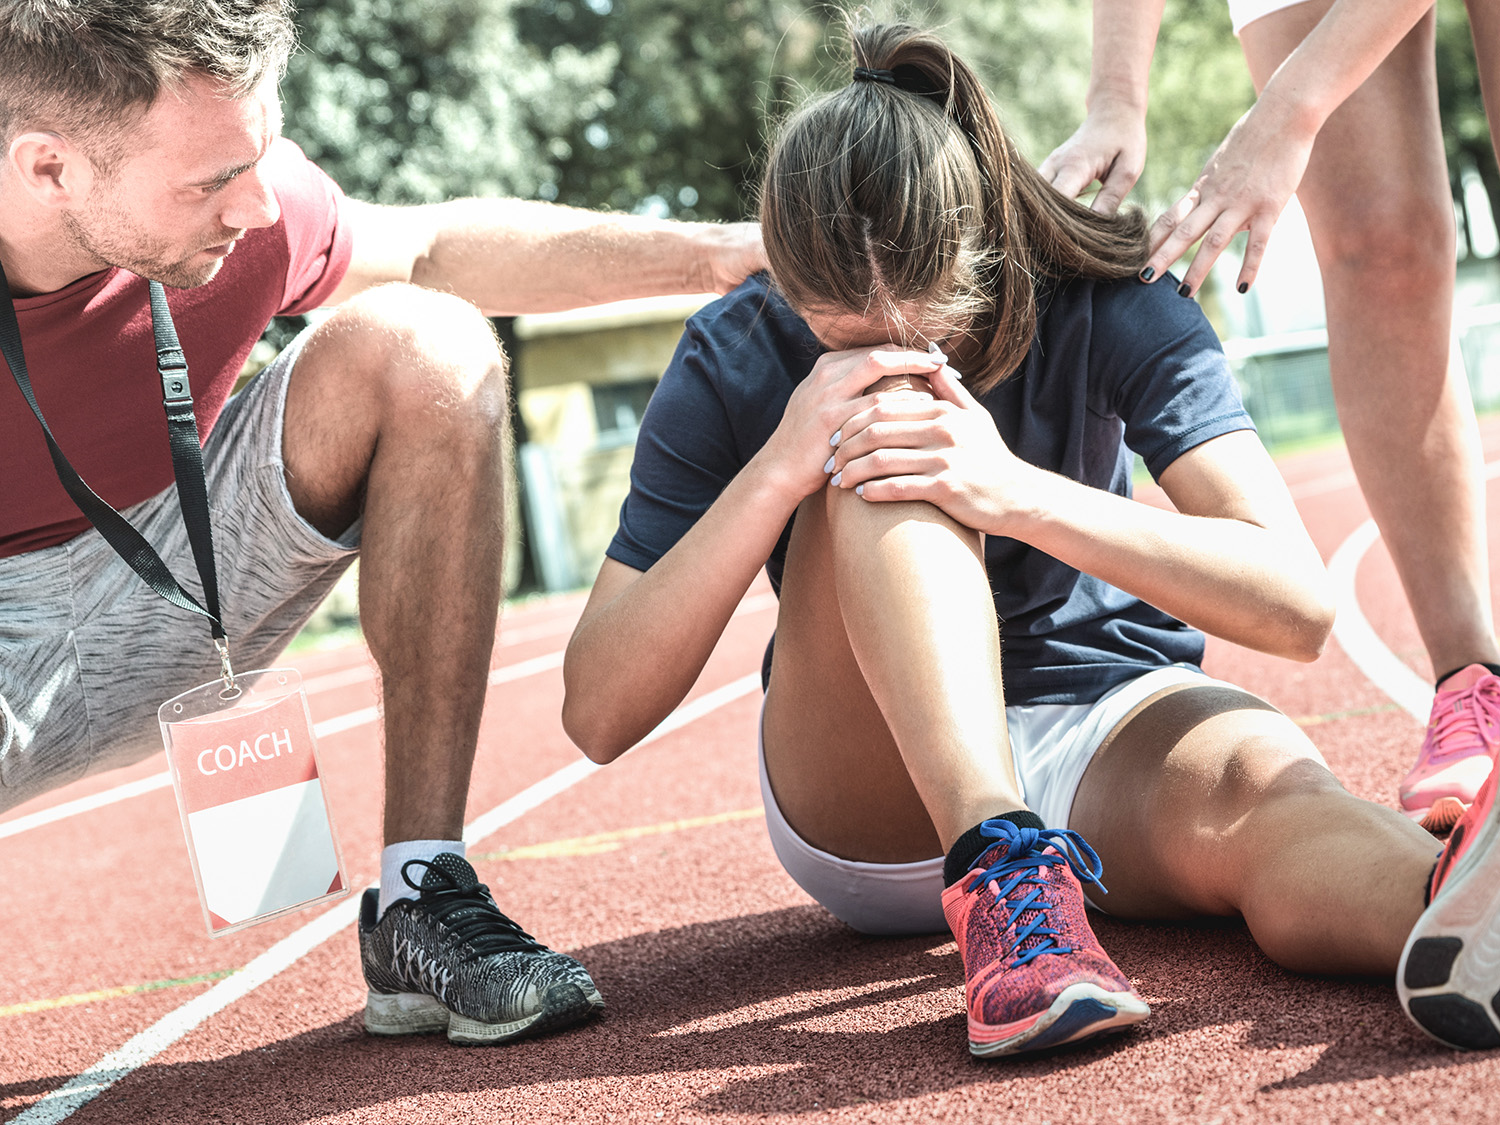 A Coach's Role in Supporting Athlete Mental Health Post Injury